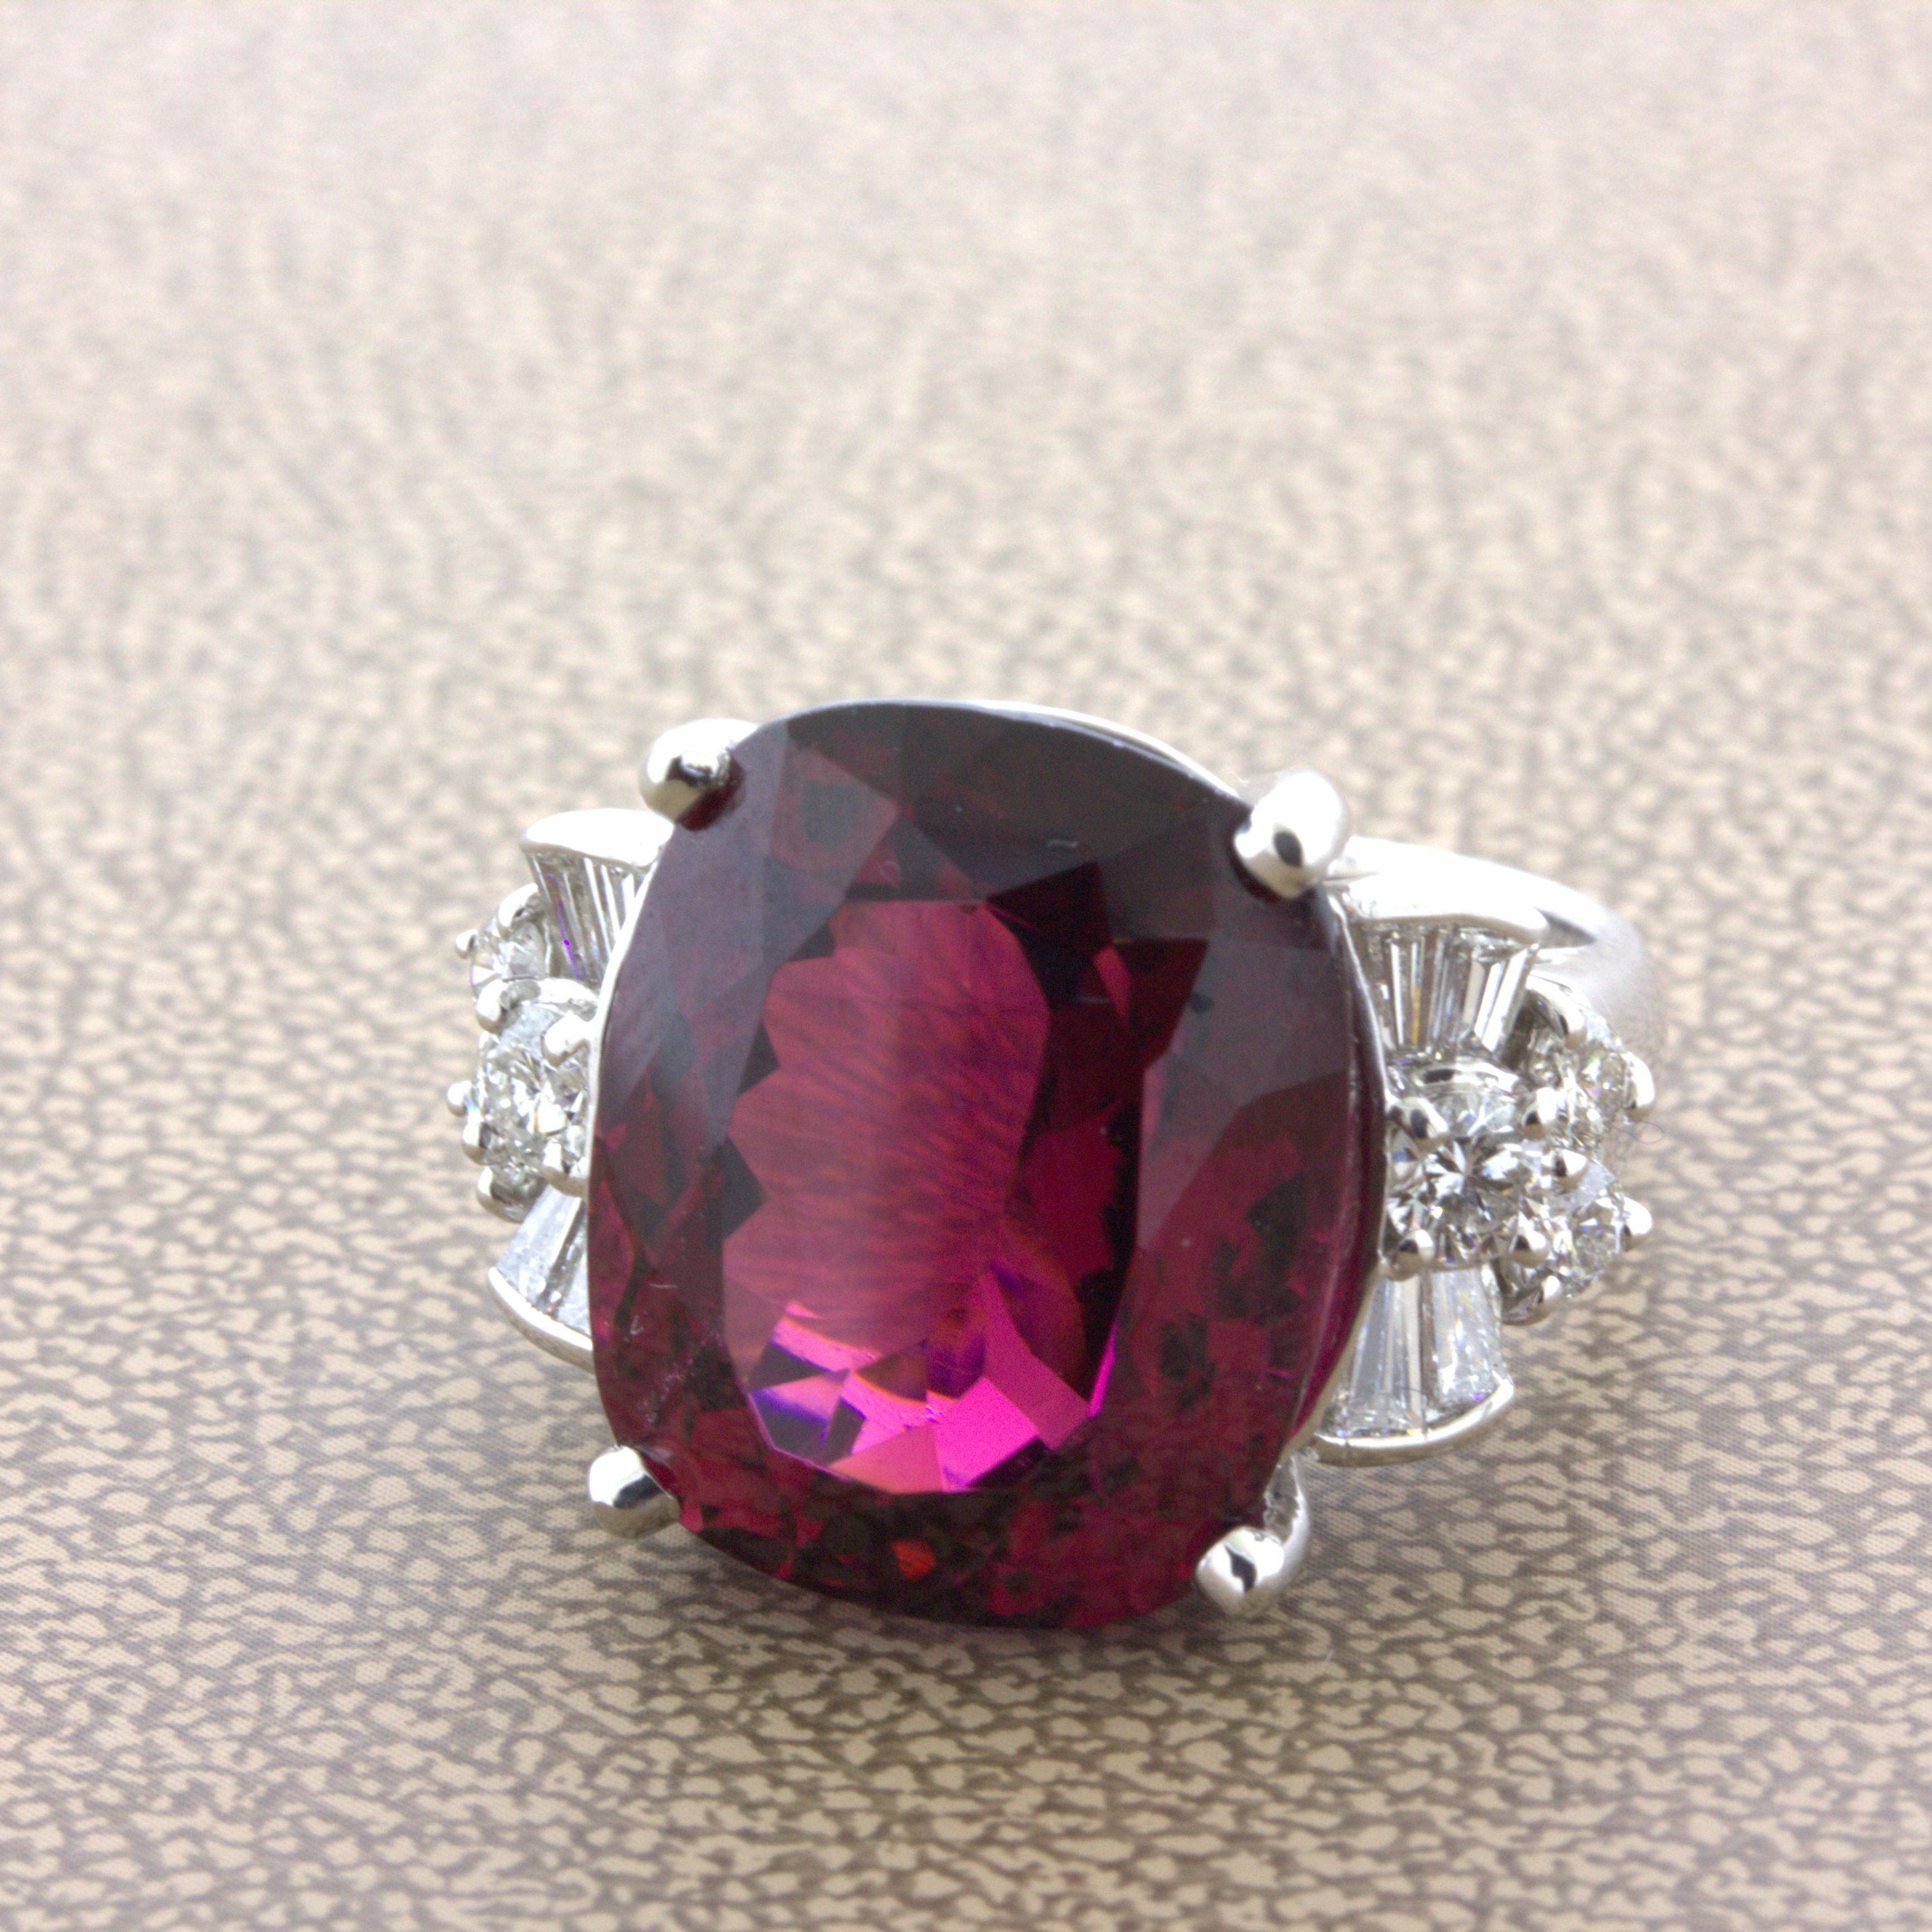 A superb gem rhodolite garnet weighing an impressive 15.64 carats. What makes this gem special is the combination of its large size, its clarity, and its color. It is completely eye clean, even with a jewelers loupe no inclusions can be seen. Adding